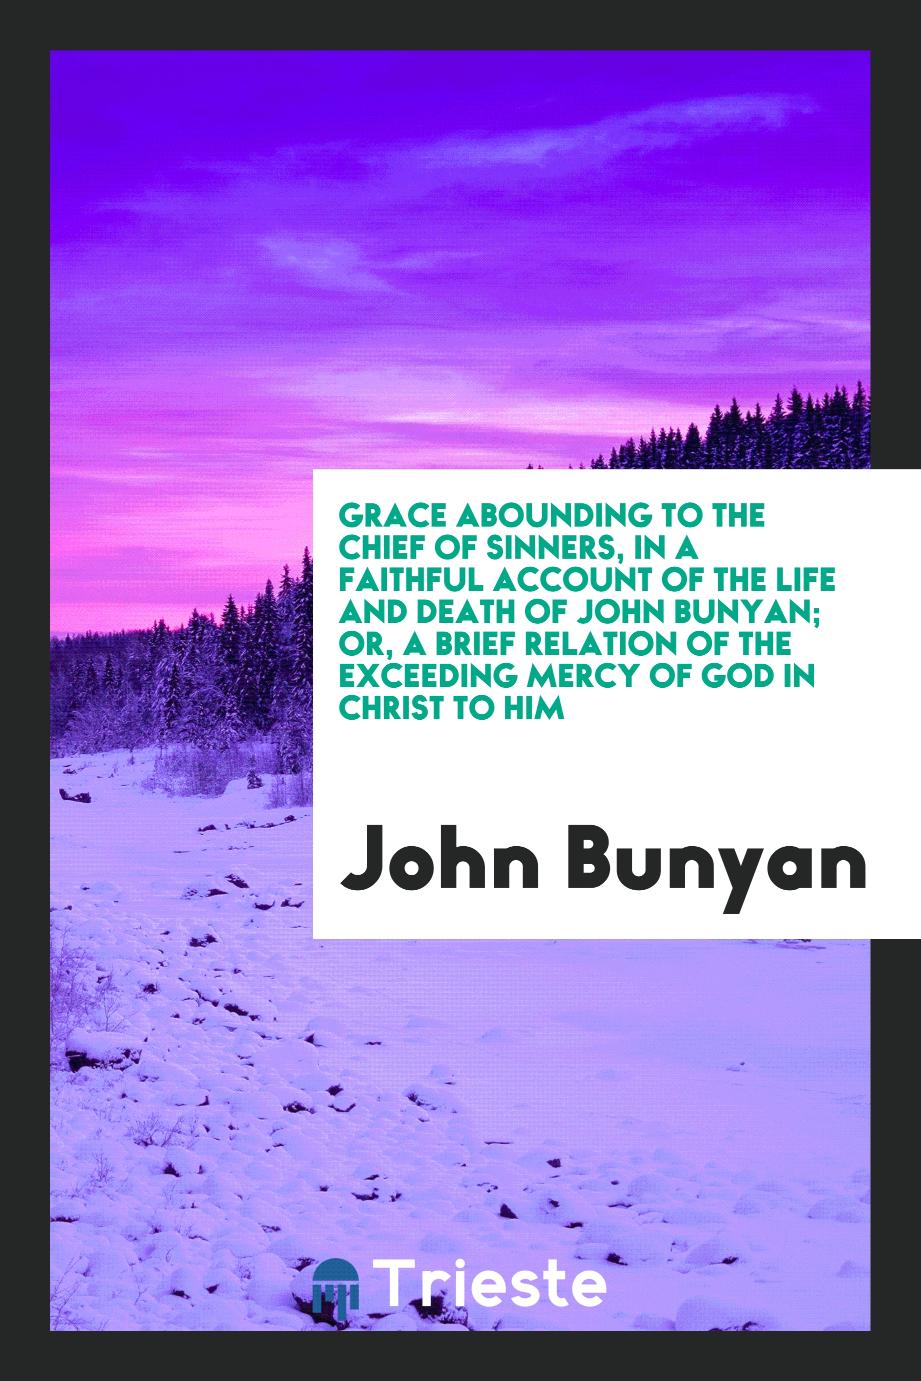 Grace abounding to the chief of sinners, in a faithful account of the life and death of John Bunyan; or, A brief relation of the exceeding mercy of God in Christ to him